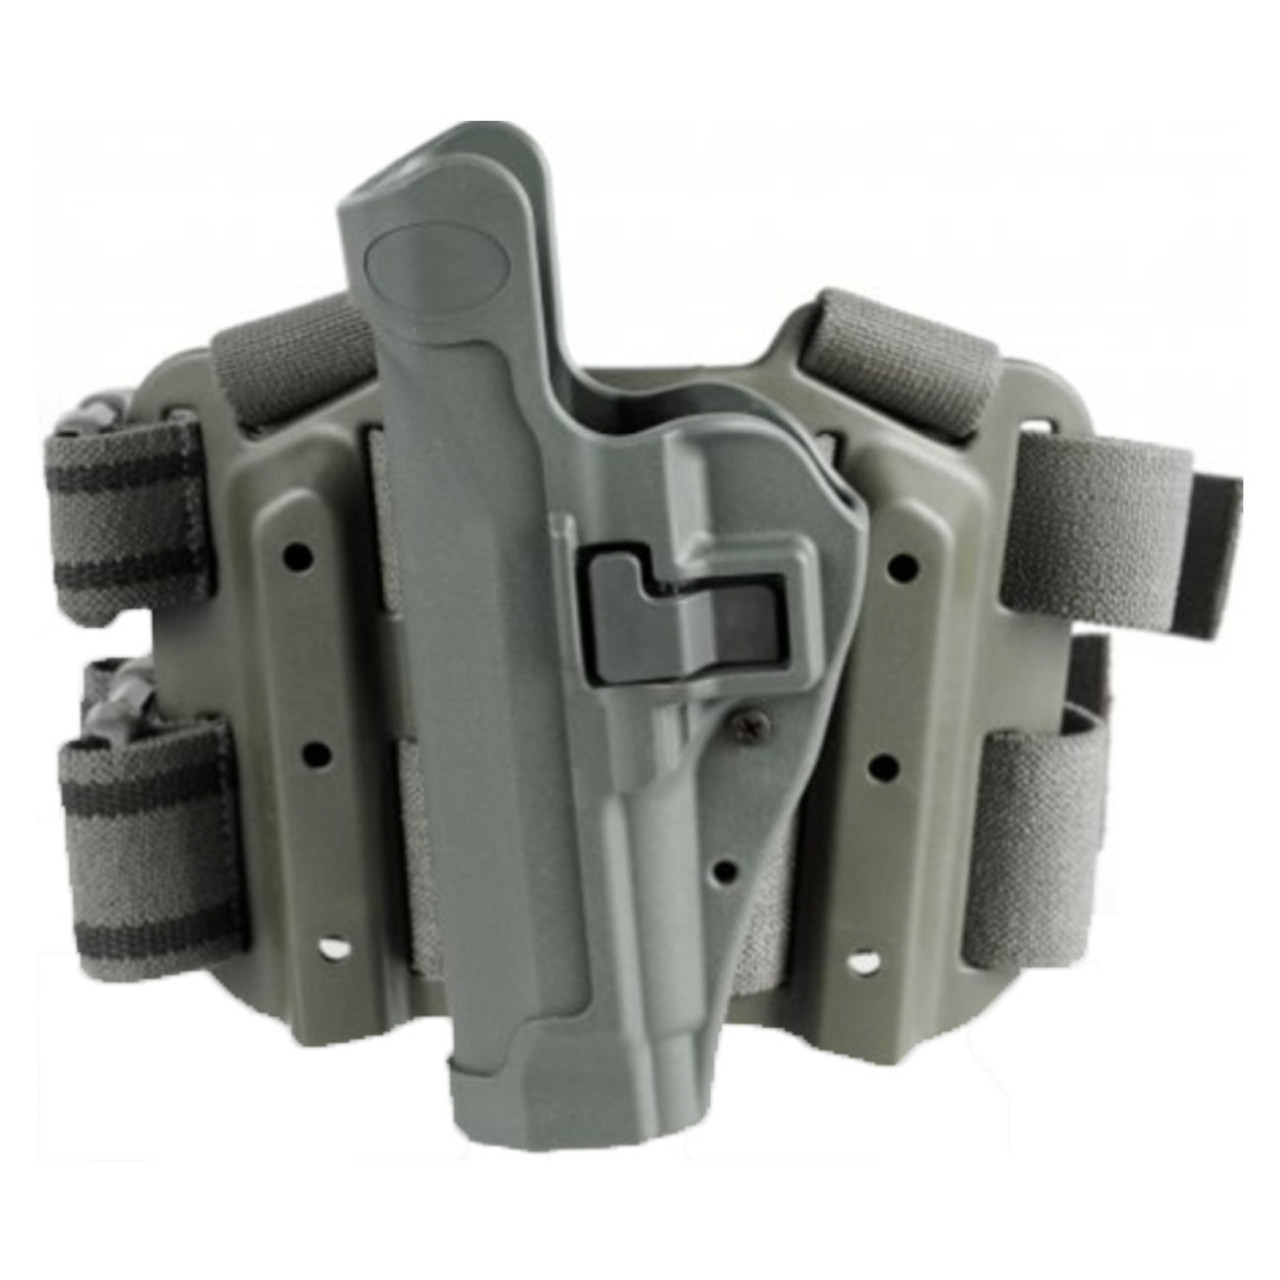 Blackhawk 4305 Serpa Level 2 Tactical Holster Available In Black Coyote Tan Foliage Green And